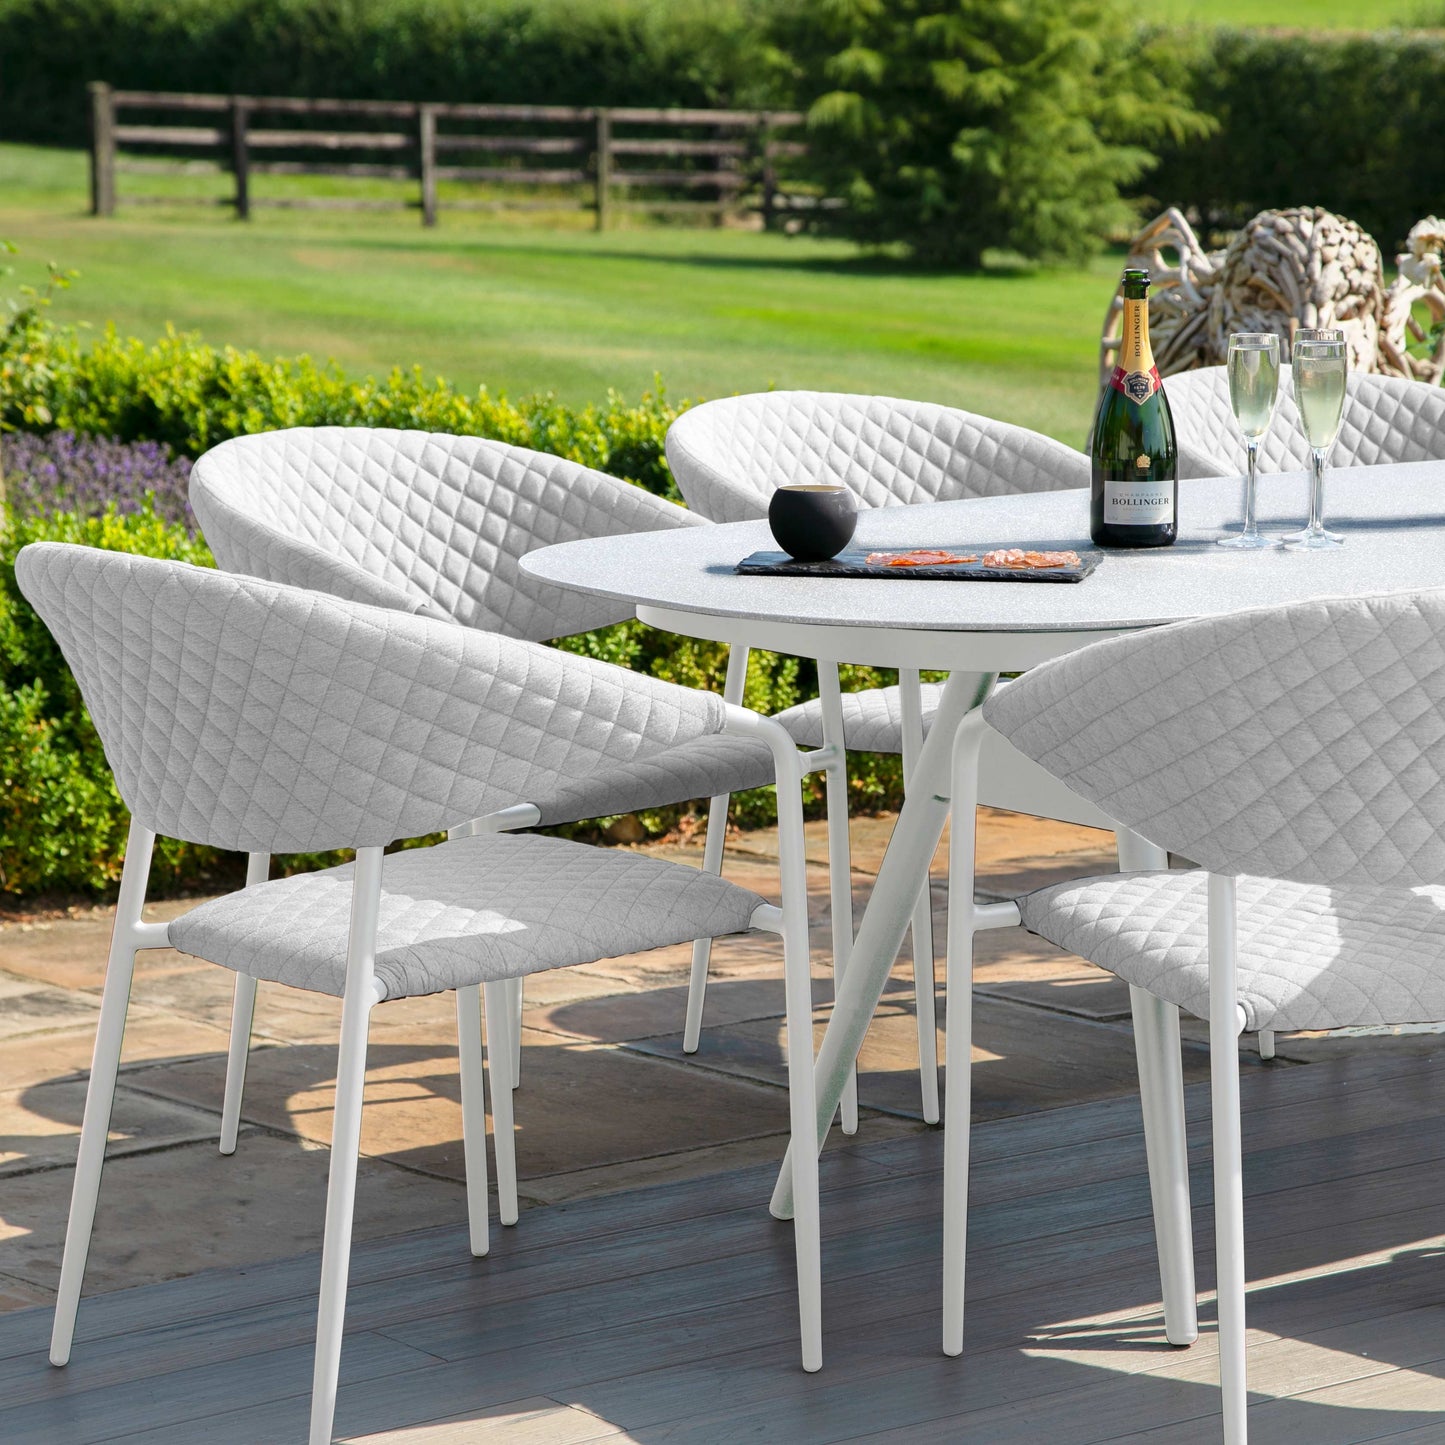 Outdoor Fabric Pebble 8 Seat Oval Dining Set